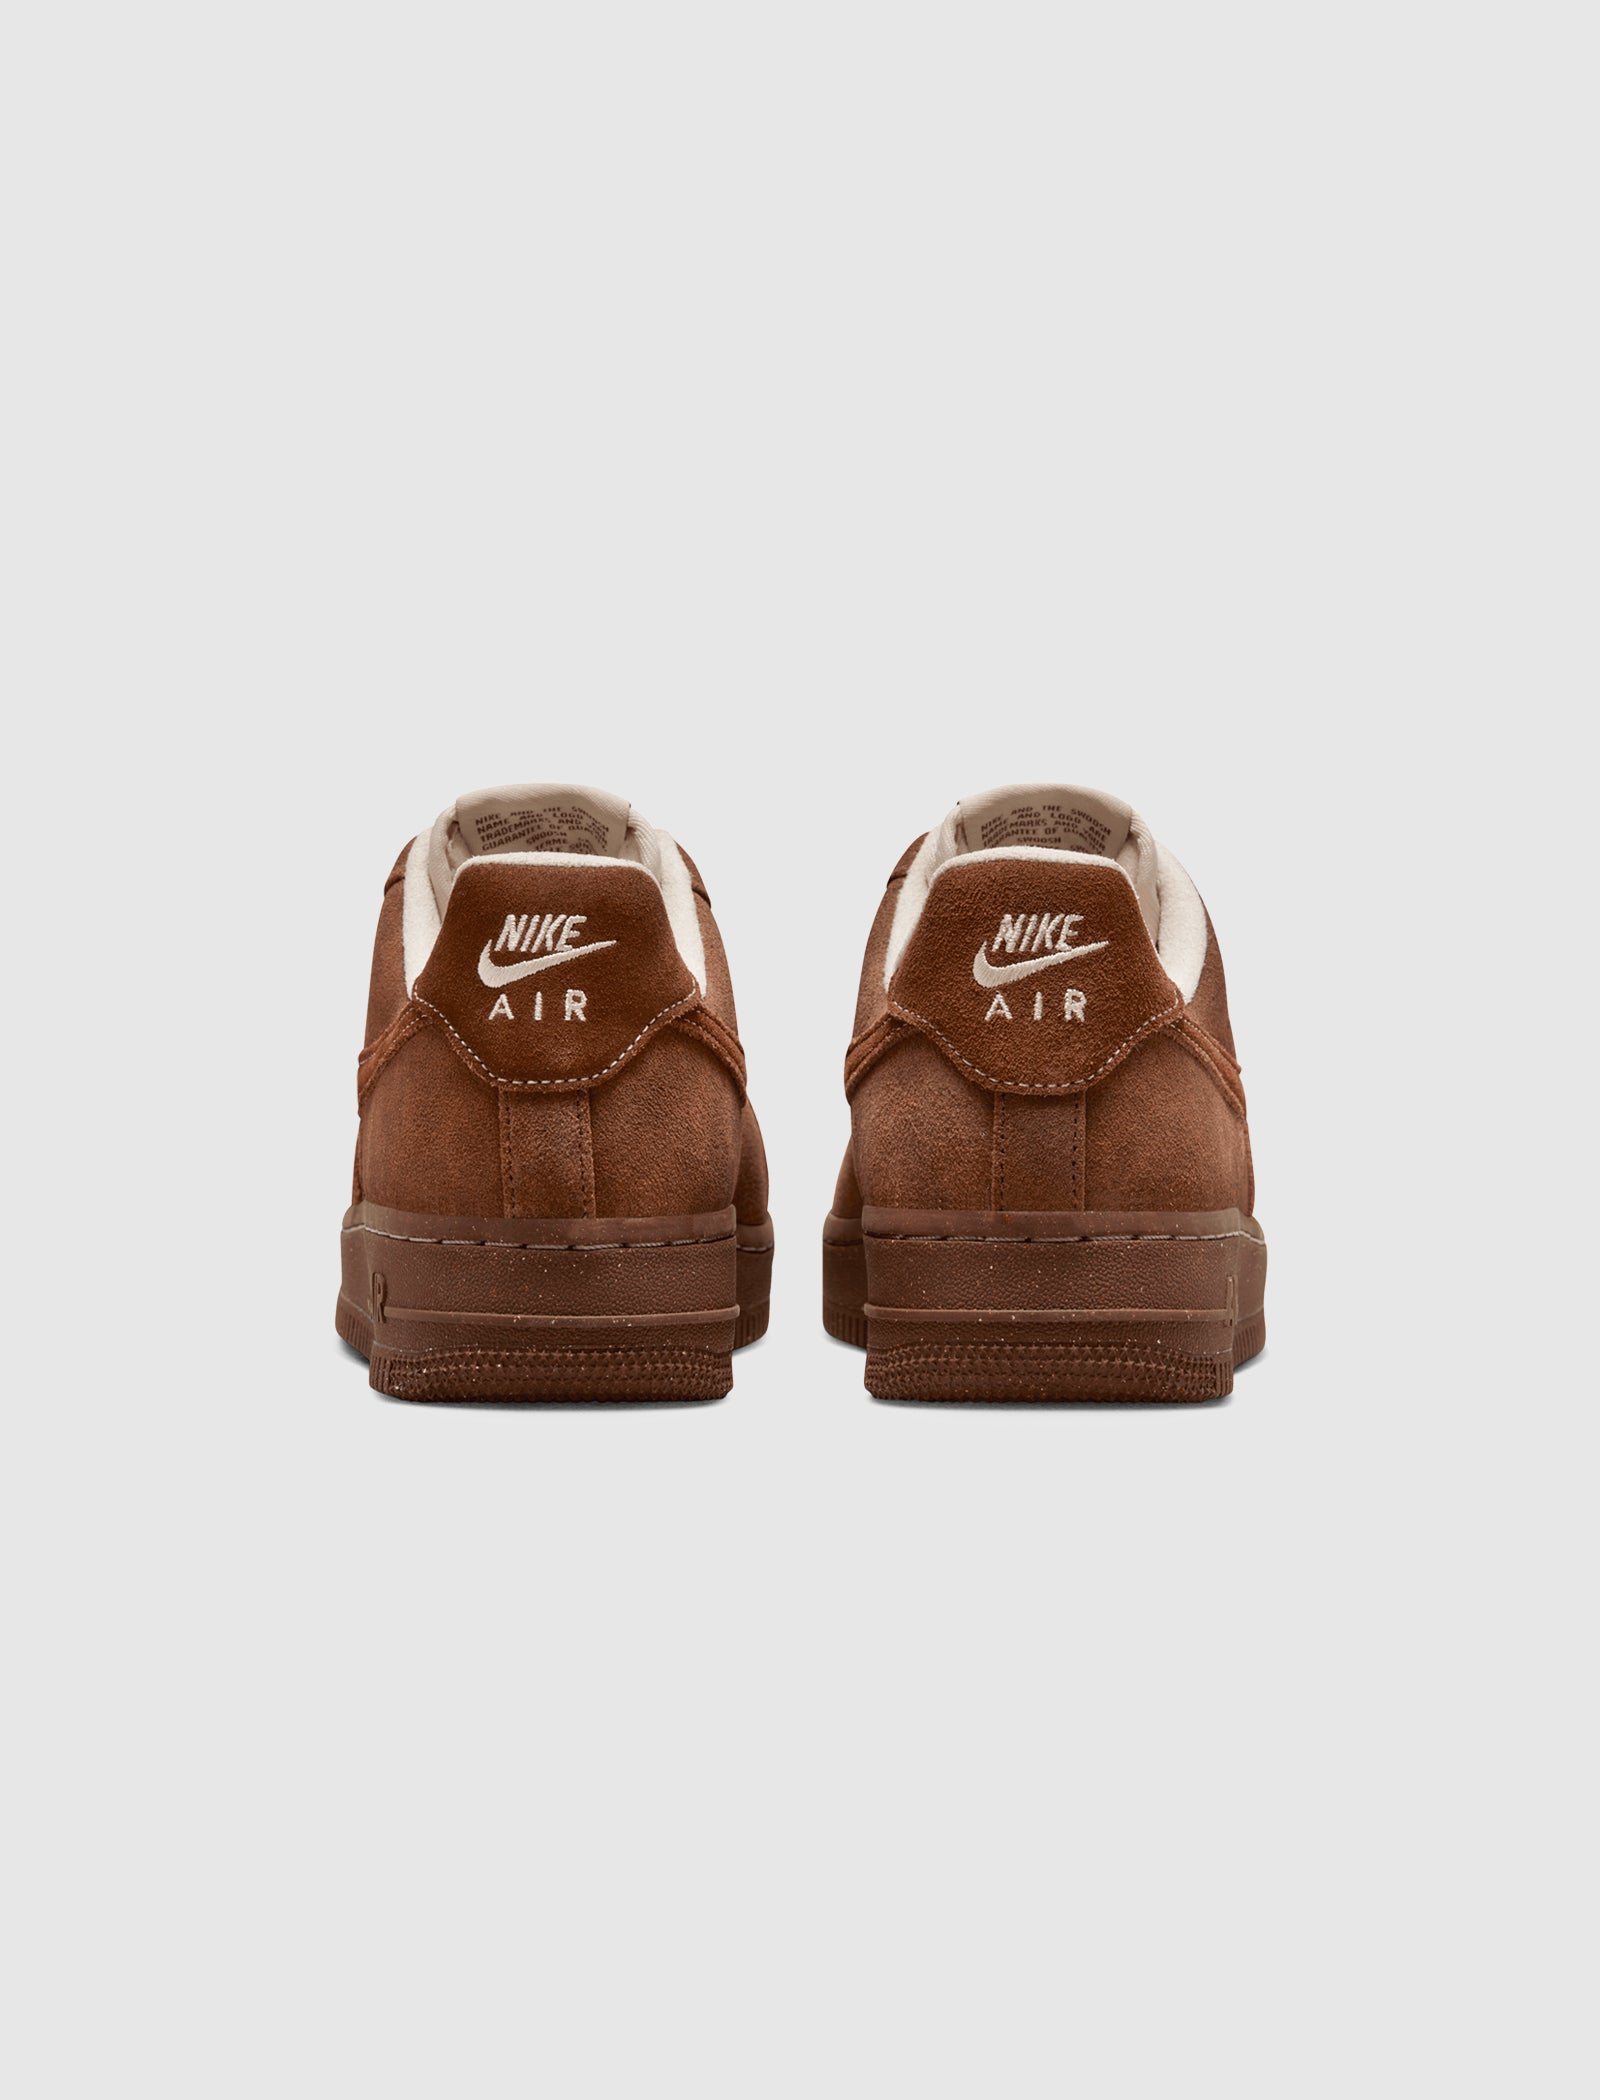 WOMENS AIR FORCE 1 '07 "CACAO WOW"